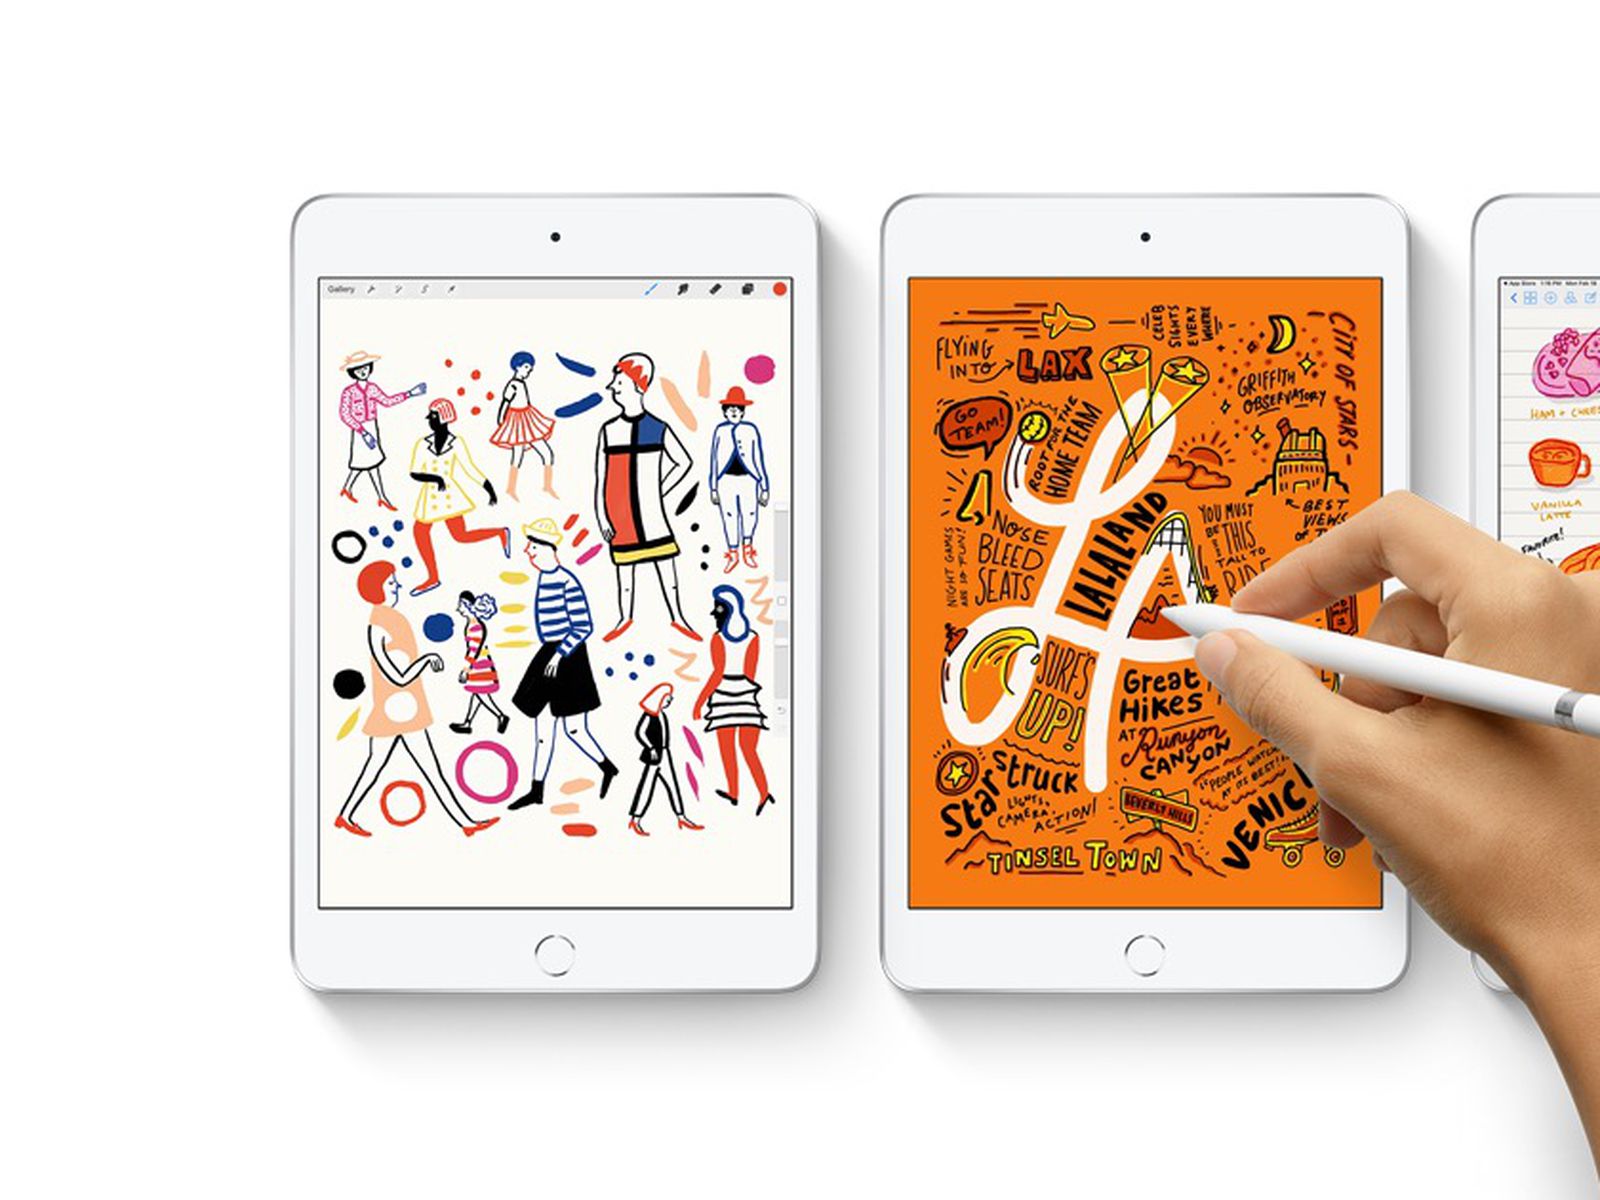 Apple Asks iPad Mini Users' Opinions About Screen Size Ahead of 